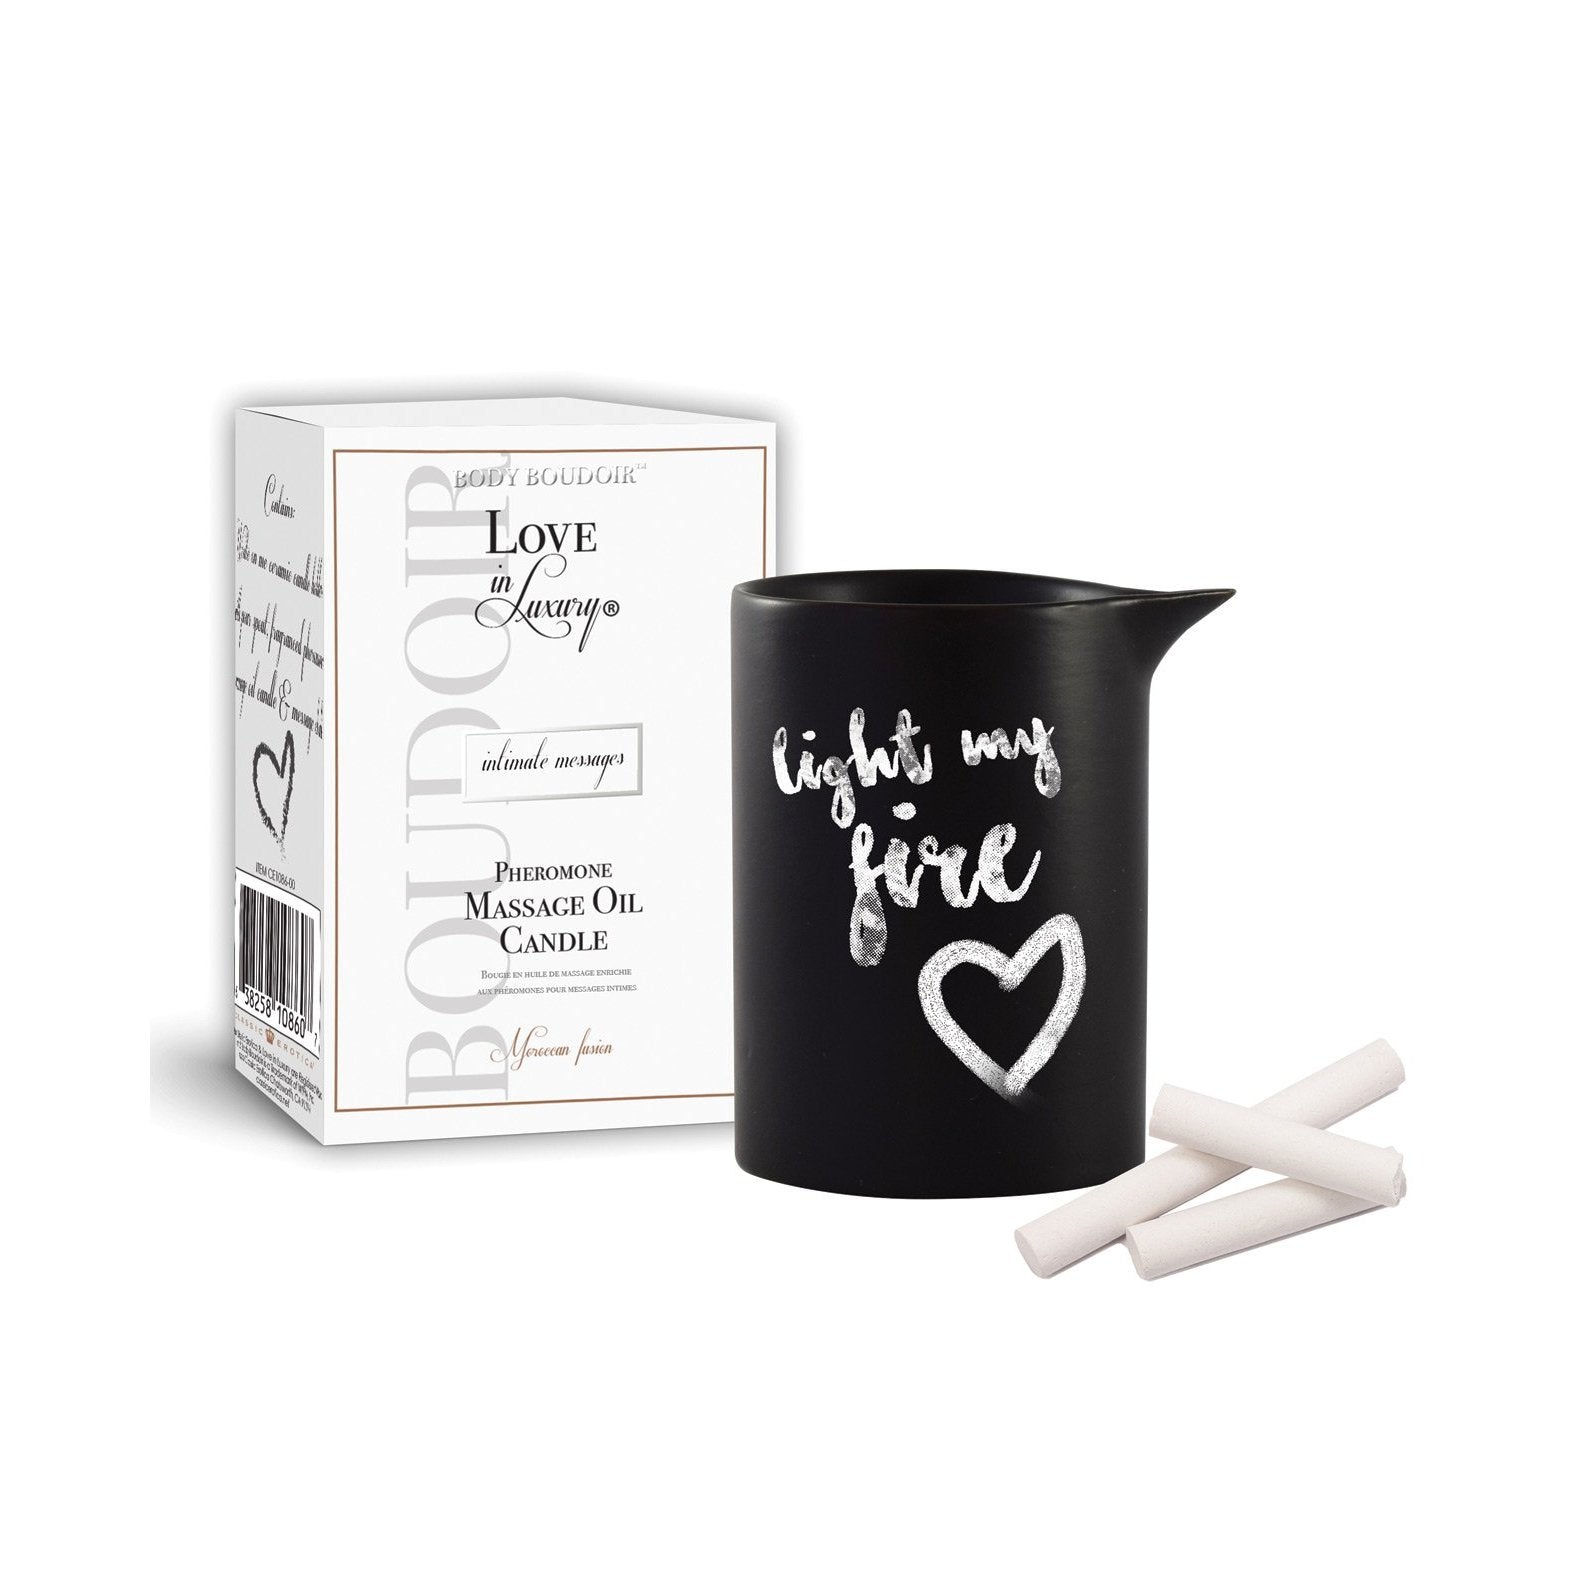 Love in Luxury Intimate Messages Massage Candle